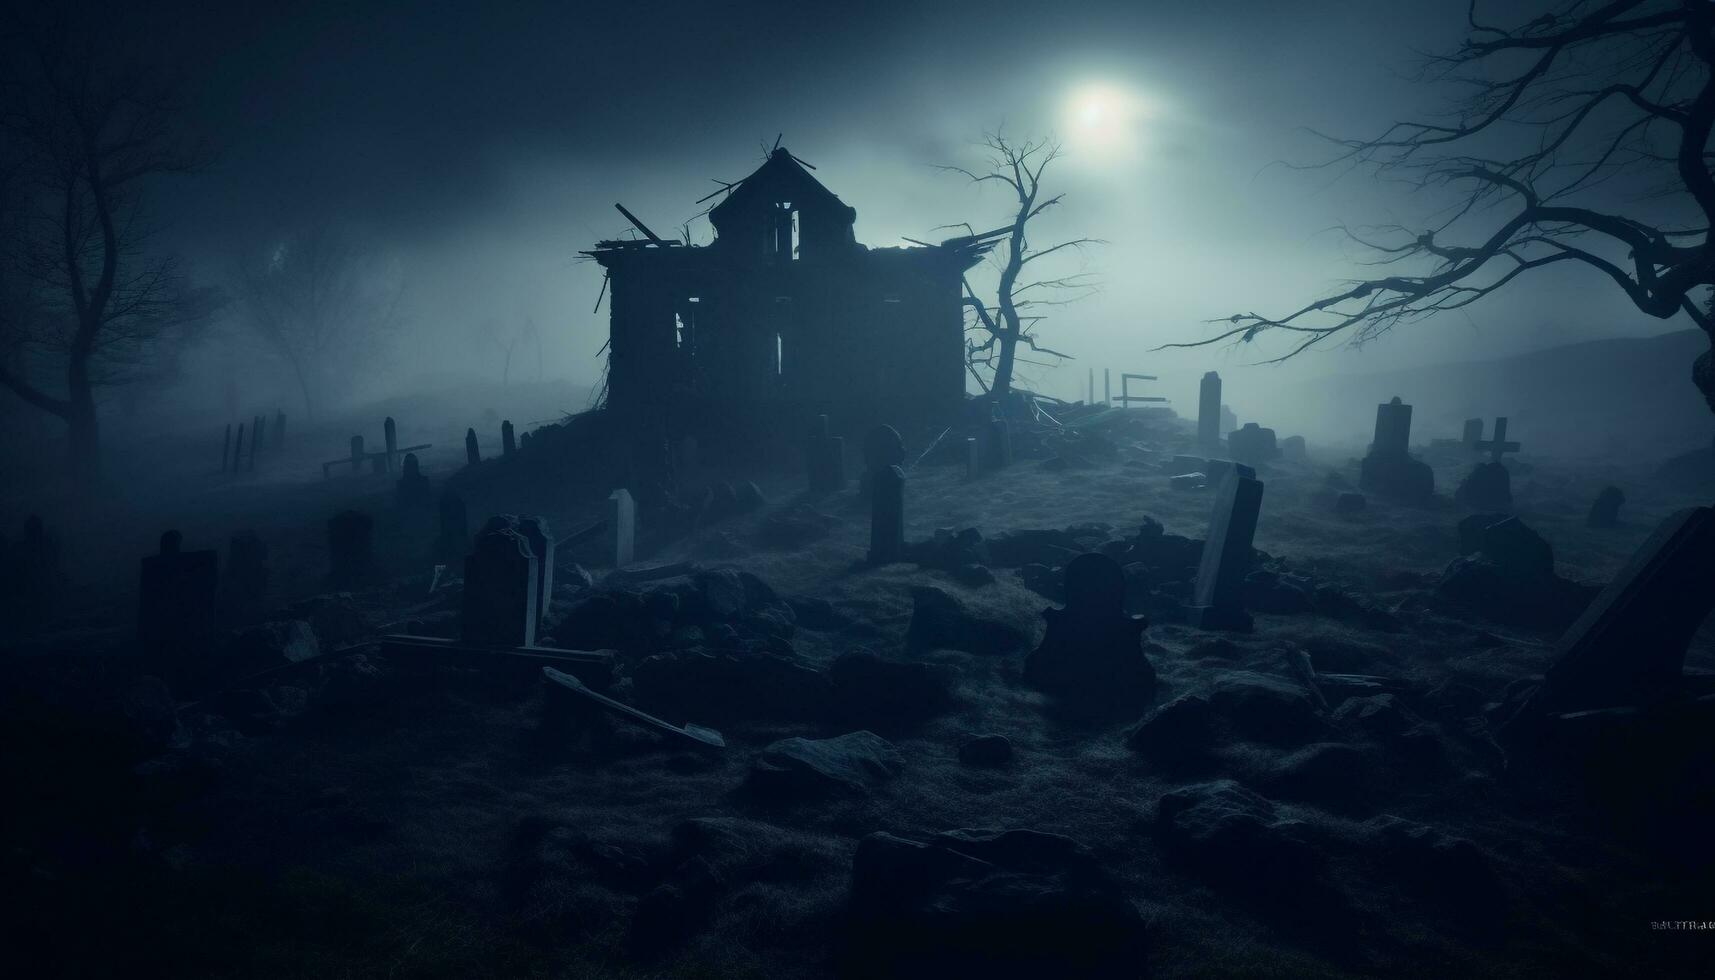 Spooky night, foggy tombstone, death silhouette, evil tree, abandoned ruin generated by AI photo